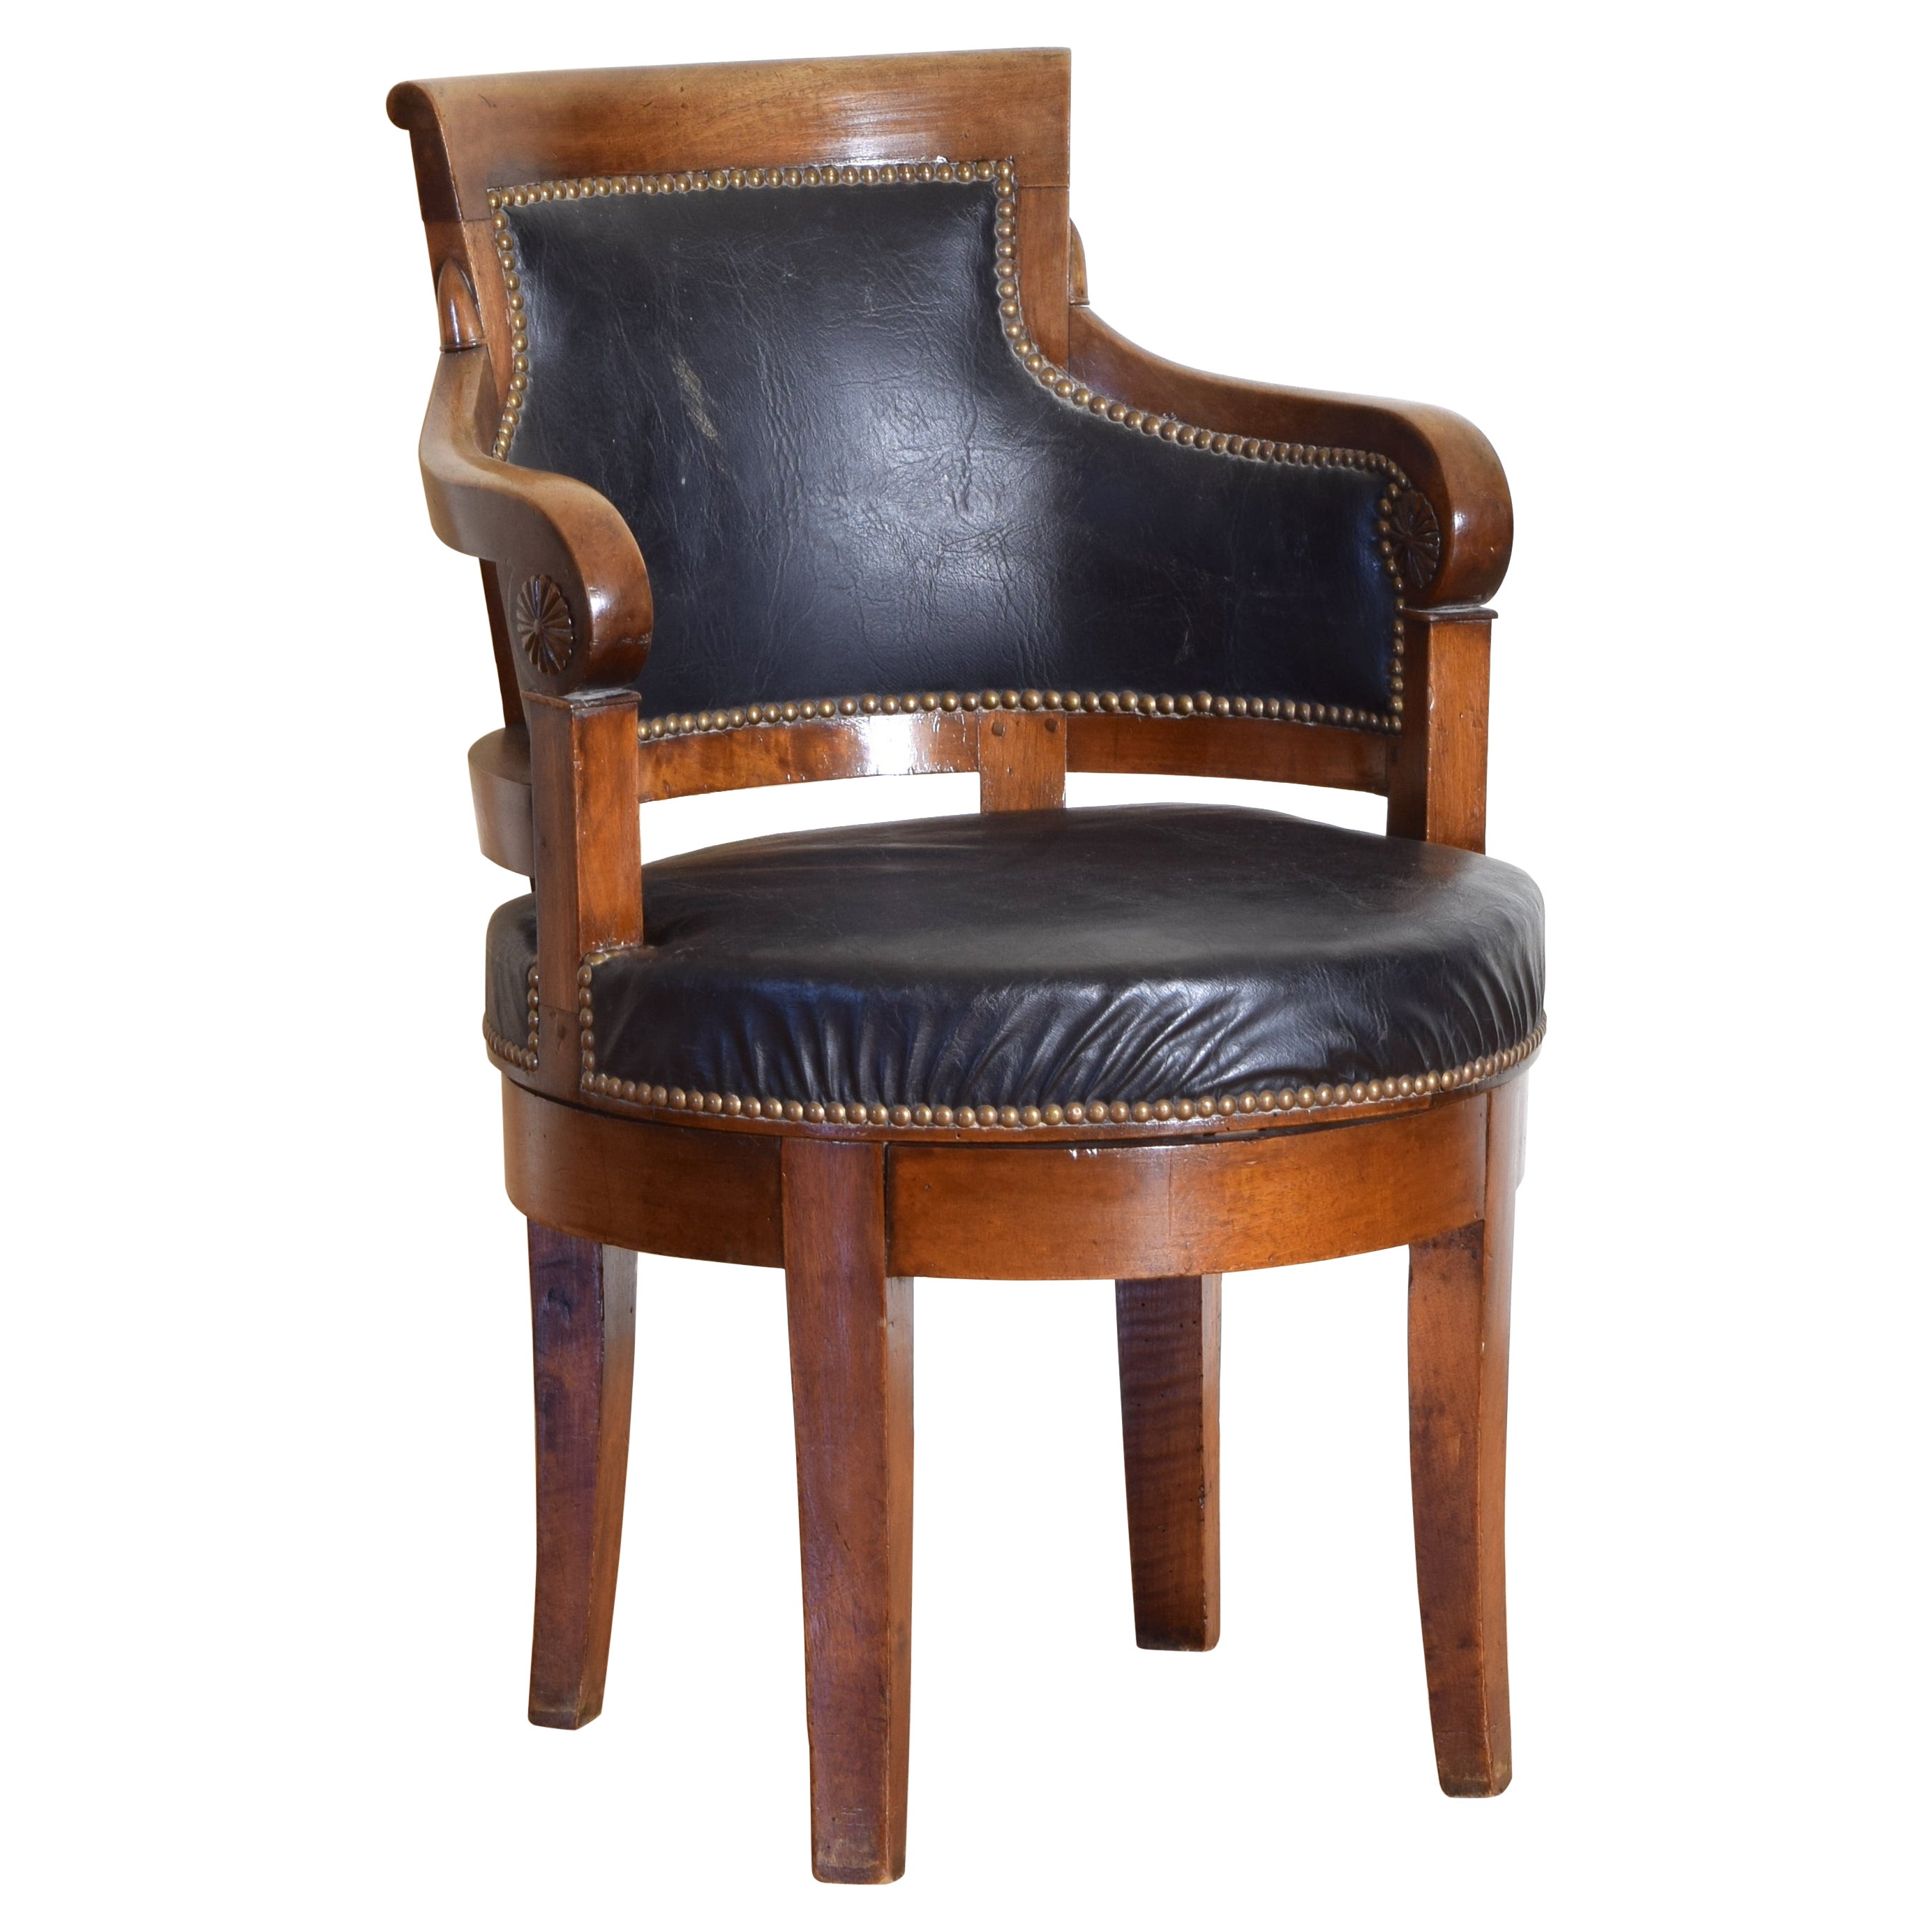 French Restauration Period Walnut and Leather Swivel Desk Chair, ca. 1815-1830